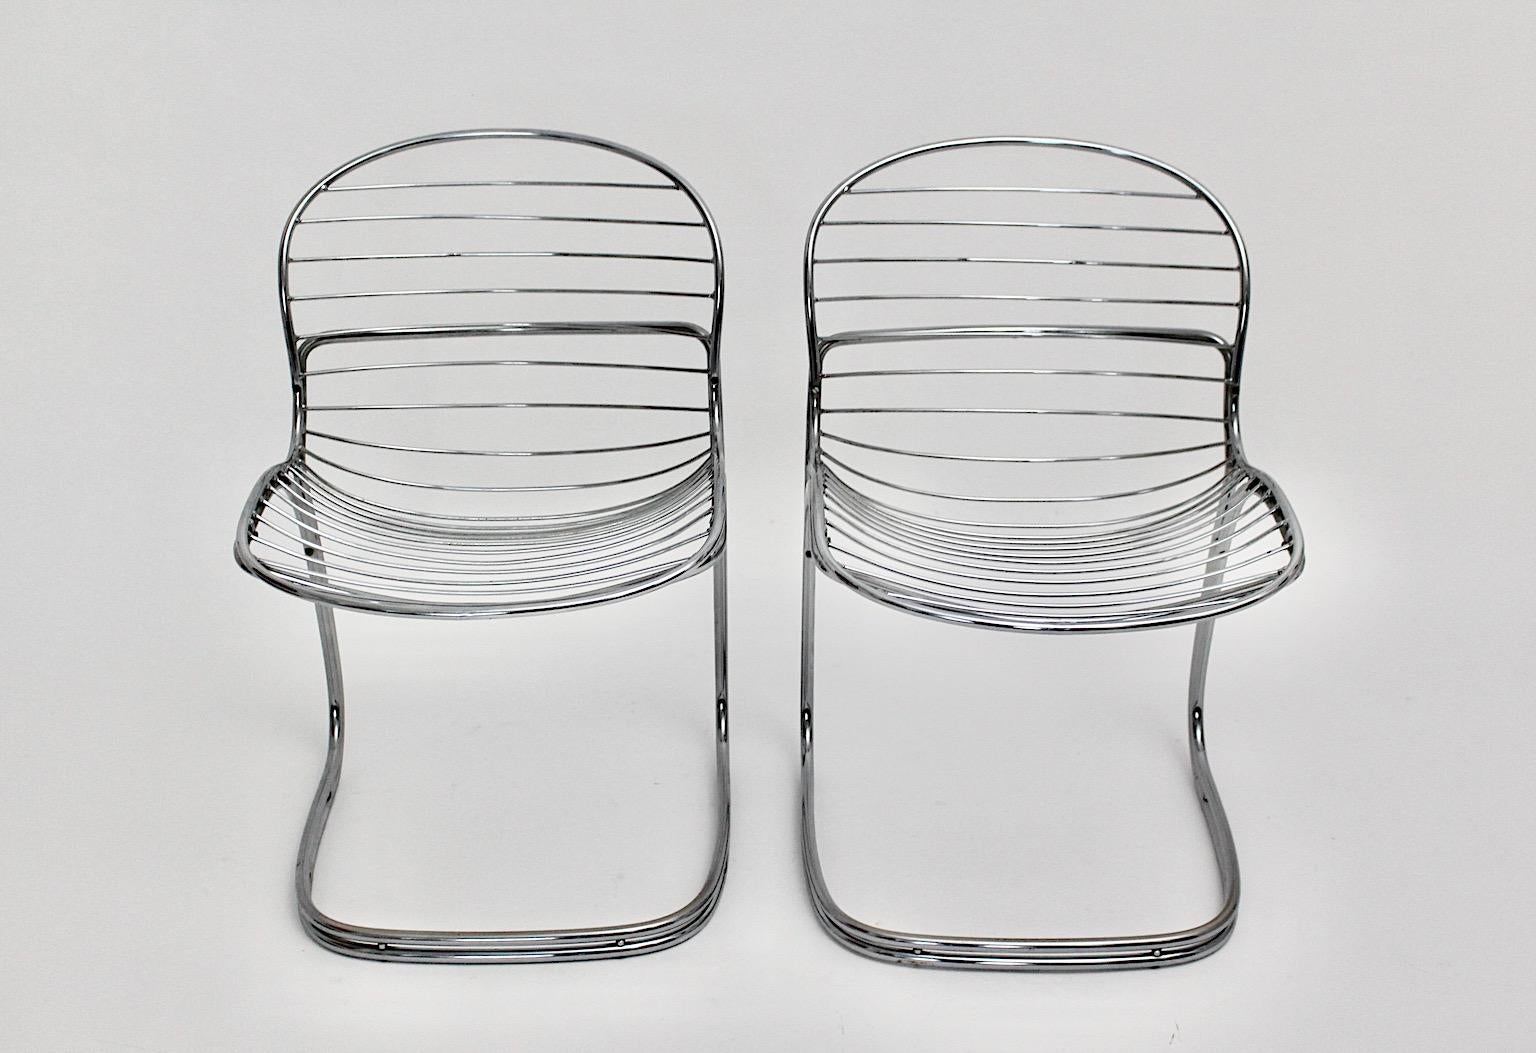 Metal Space Age Vintage Chairs Chromed Steel Gastone Rinaldi for Rima, Italy, 1970s For Sale